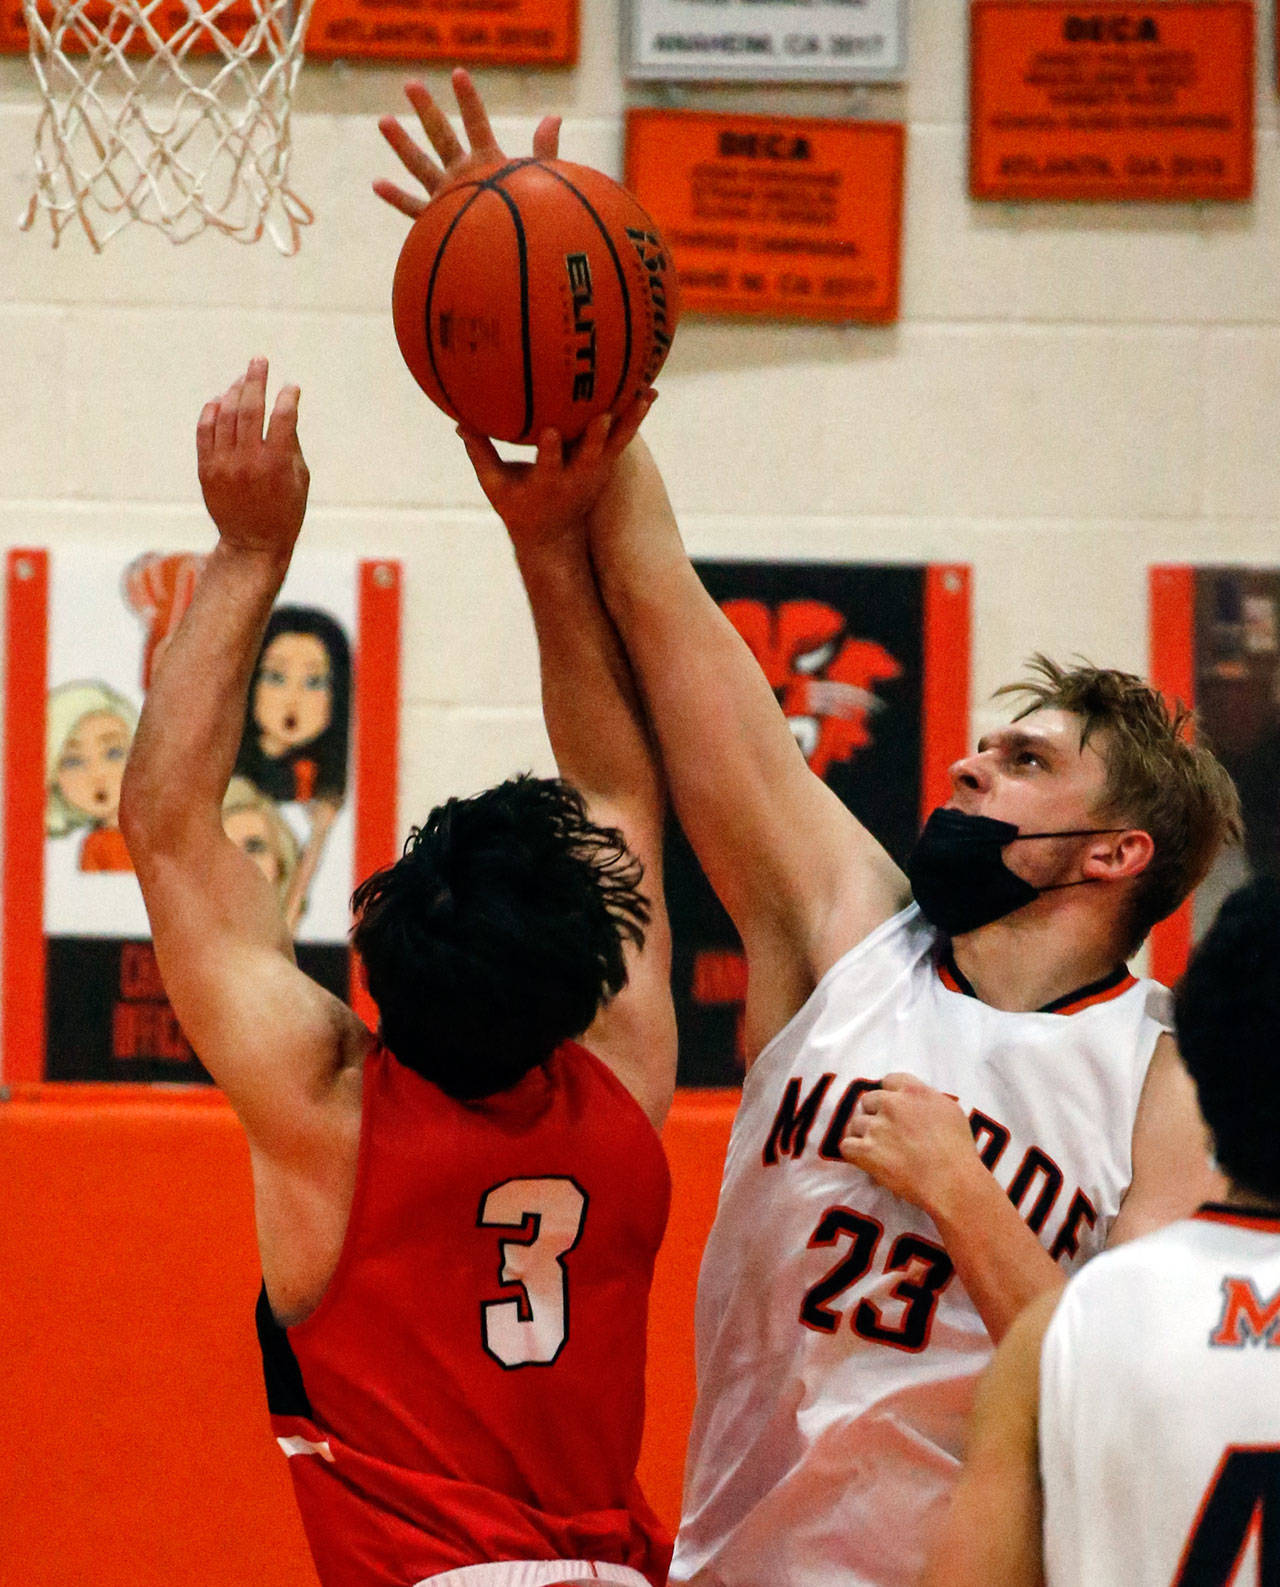 Monroe’s Sam Olson blocks a shot during a game at Monroe High School on May 11. (Kevin Clark / The Herald)